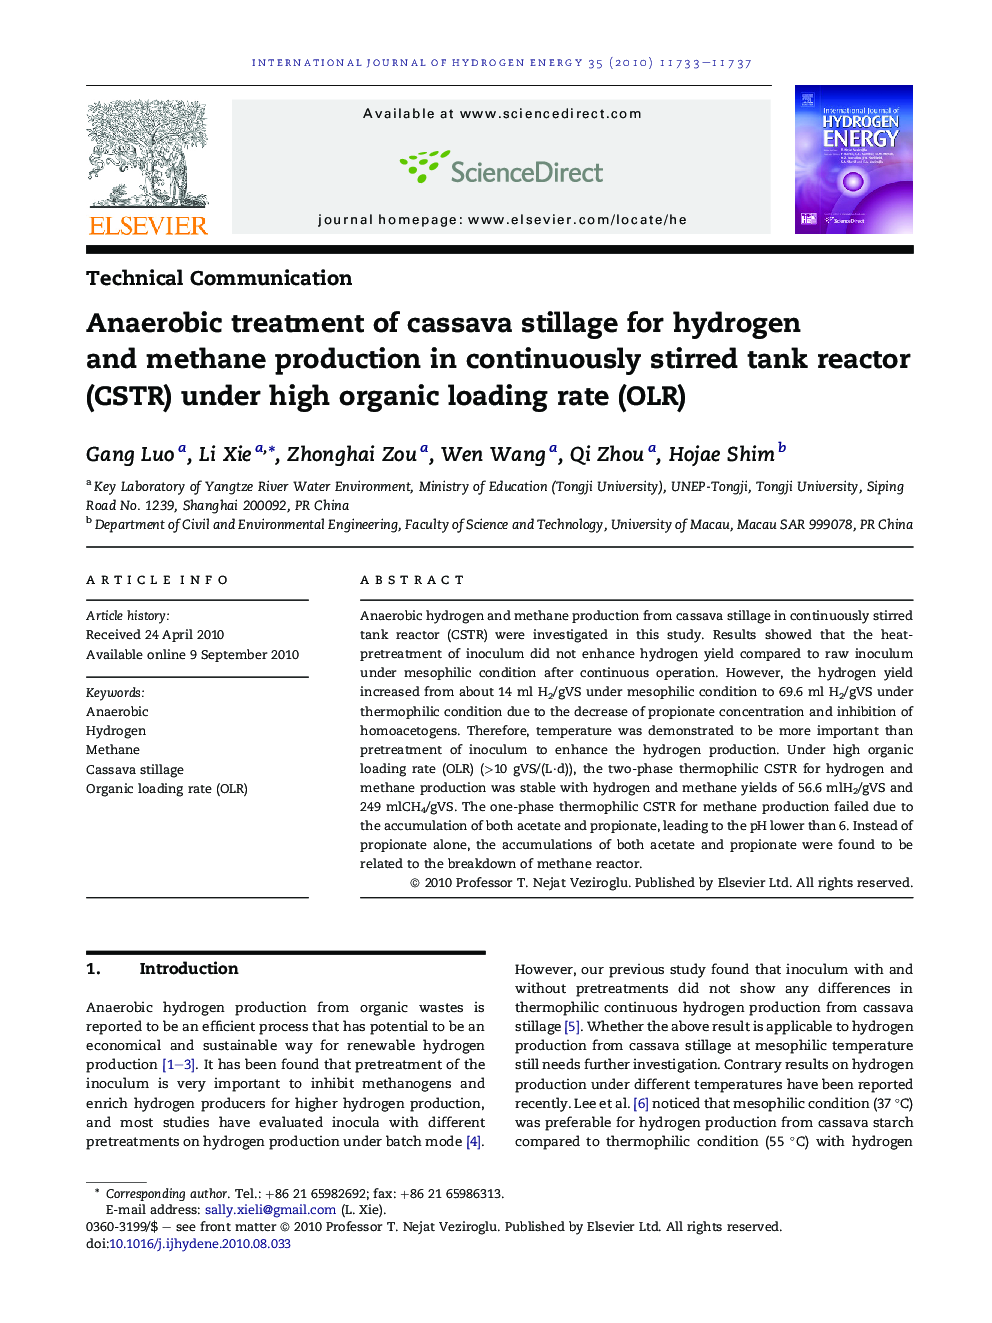 Anaerobic treatment of cassava stillage for hydrogen and methane production in continuously stirred tank reactor (CSTR) under high organic loading rate (OLR)